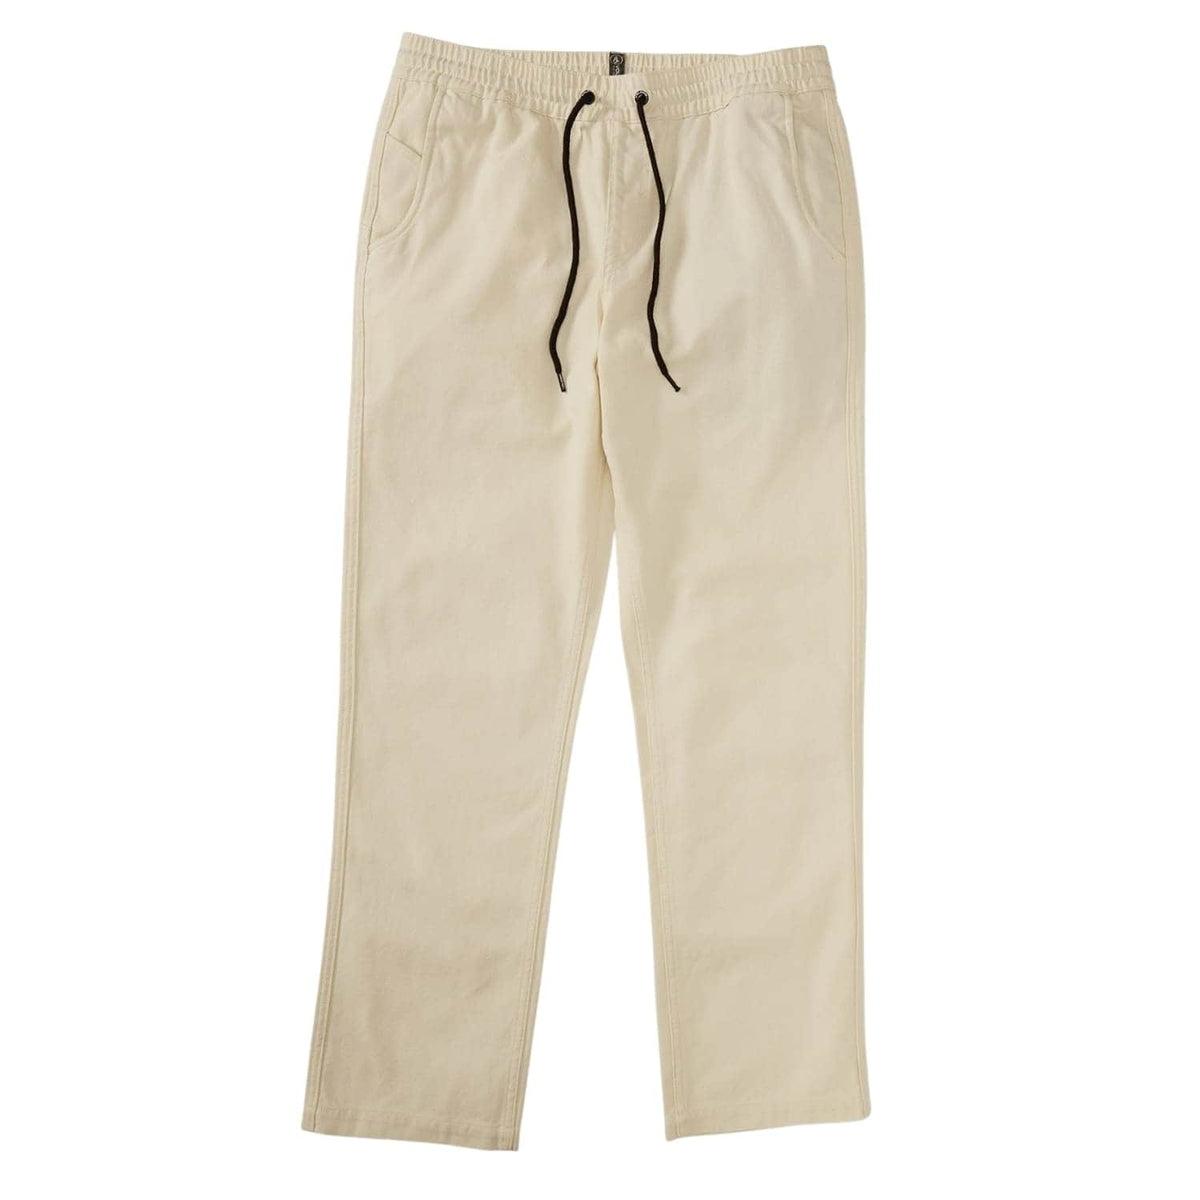 Volcom Rainer EW Twill Pants/Trousers - Whitecap Grey - Mens Relaxed/Loose Denim Jeans by Volcom